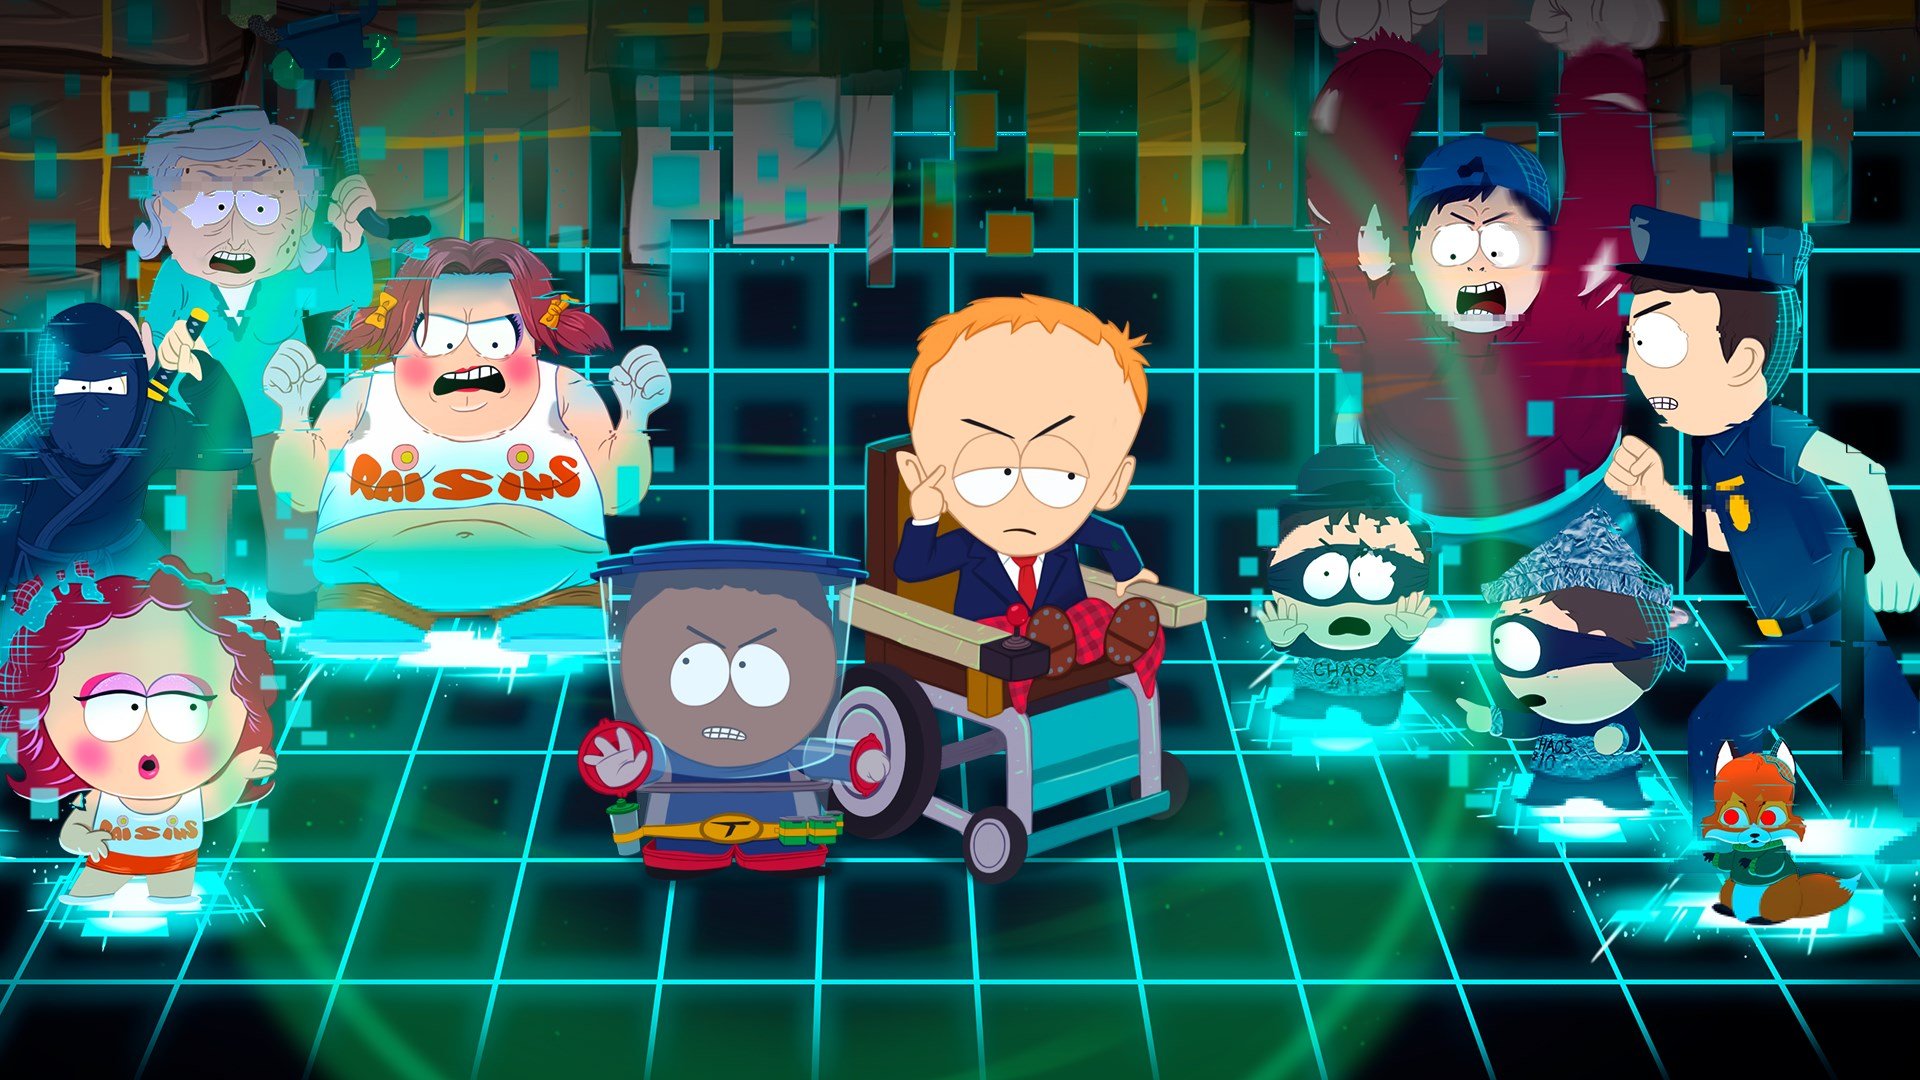 A new South Park game is in development, creators confirm VGC